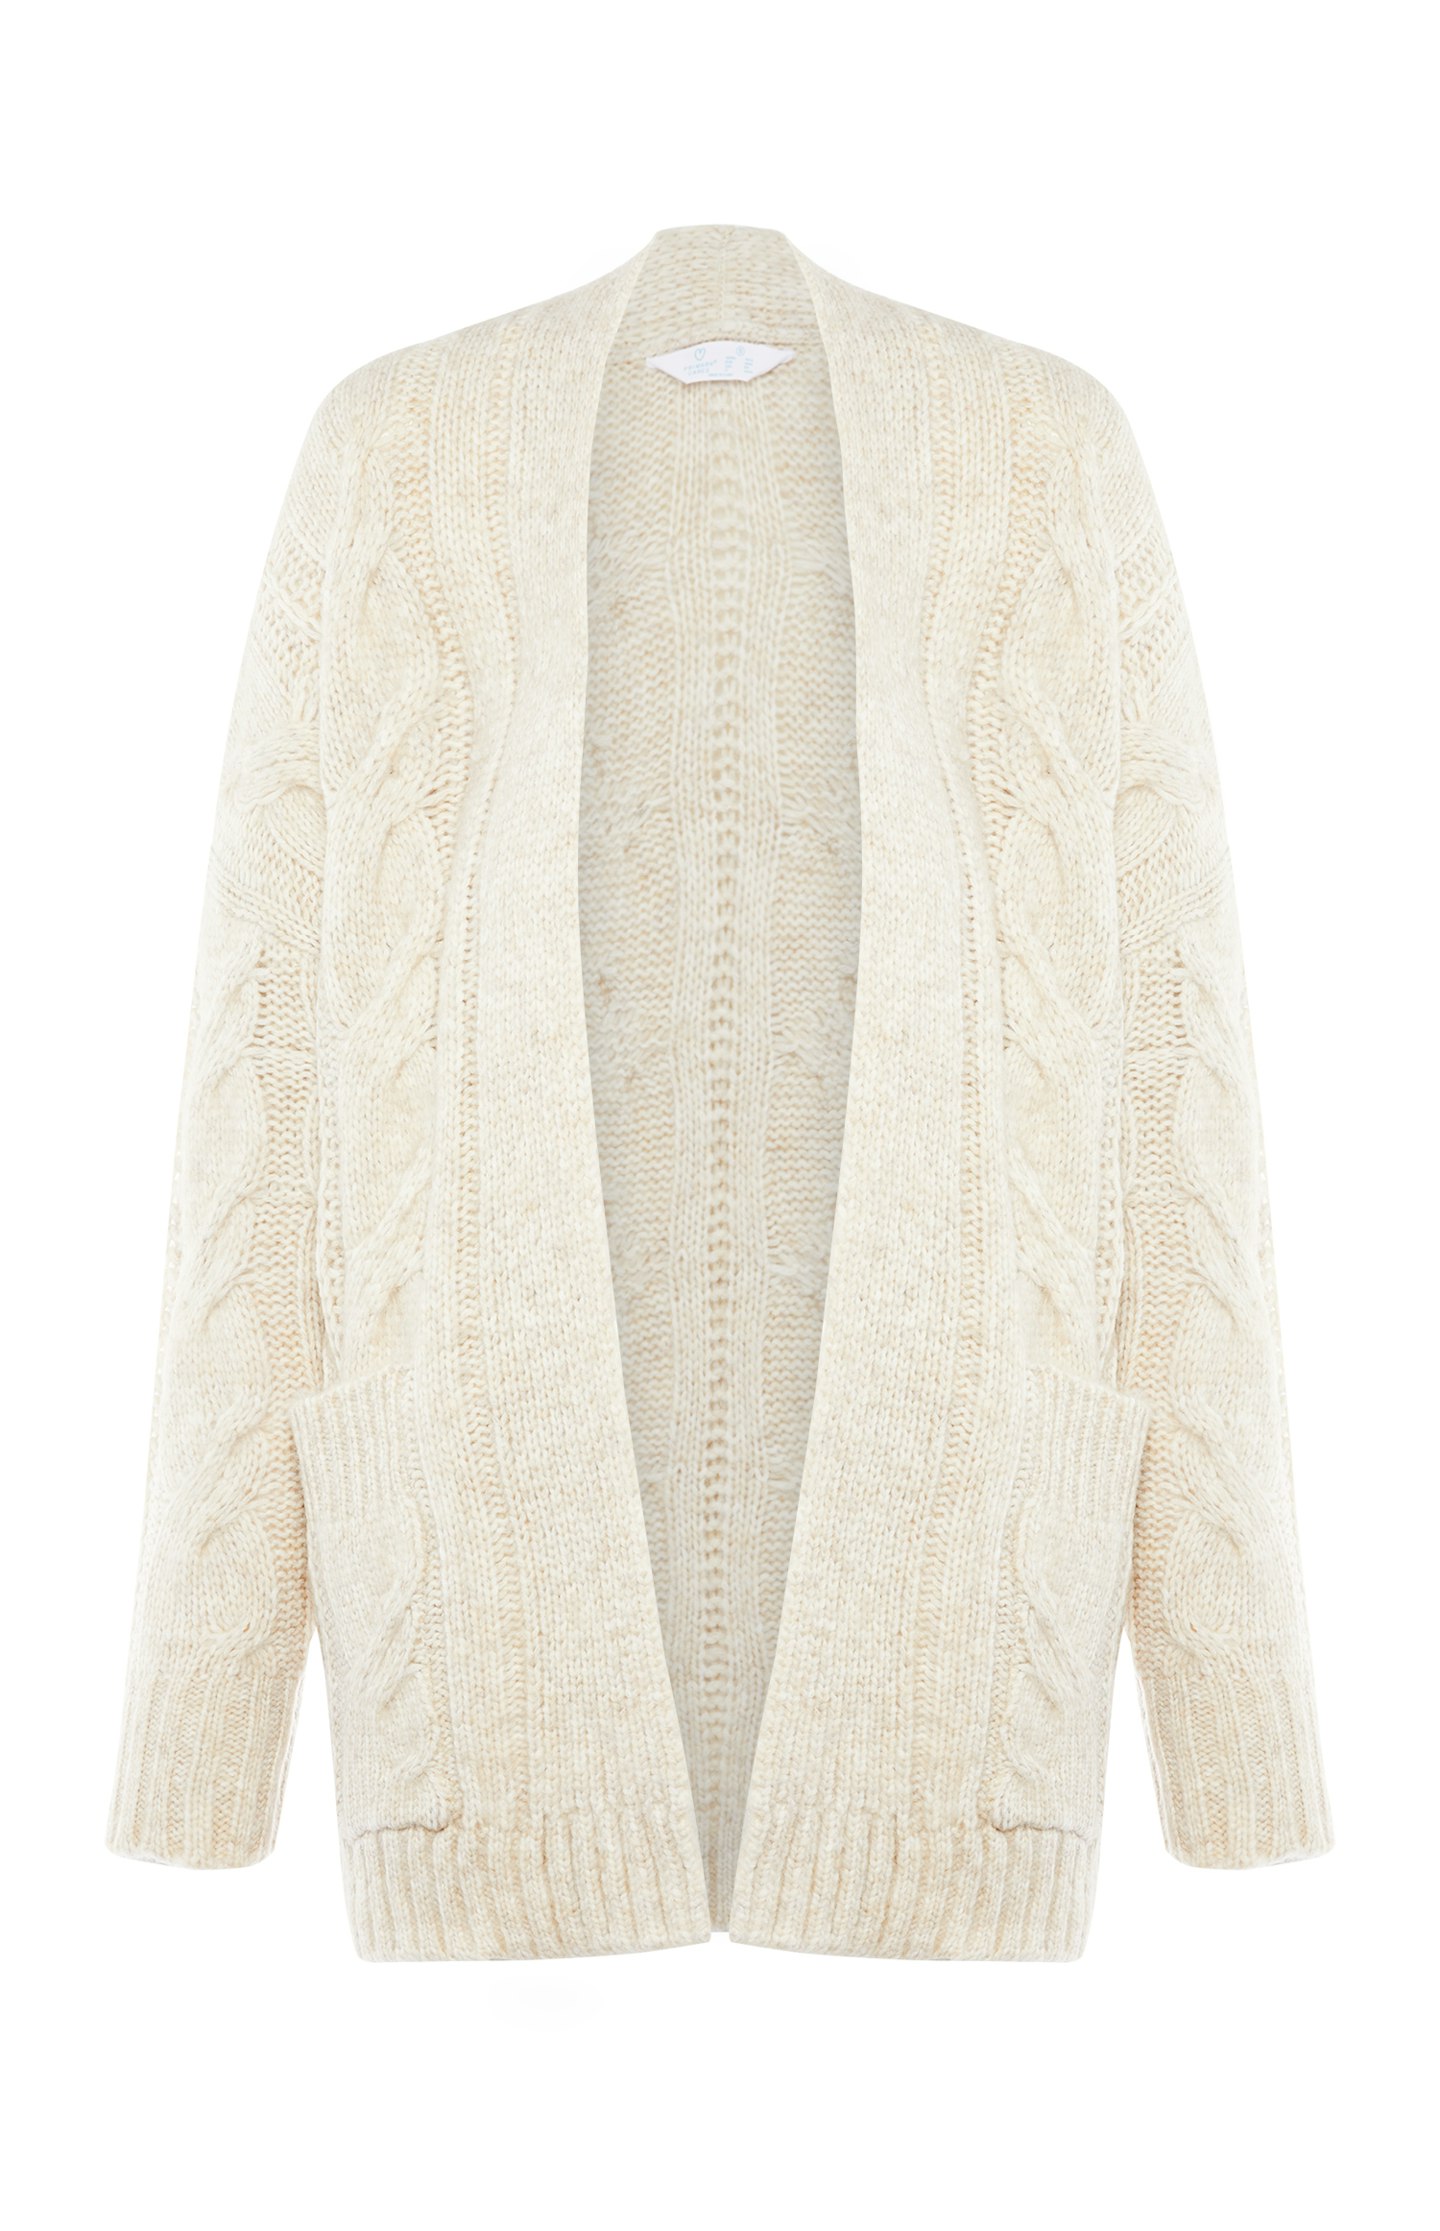 Primark, Cream Cardigan, £12, Available In-Store Next Week